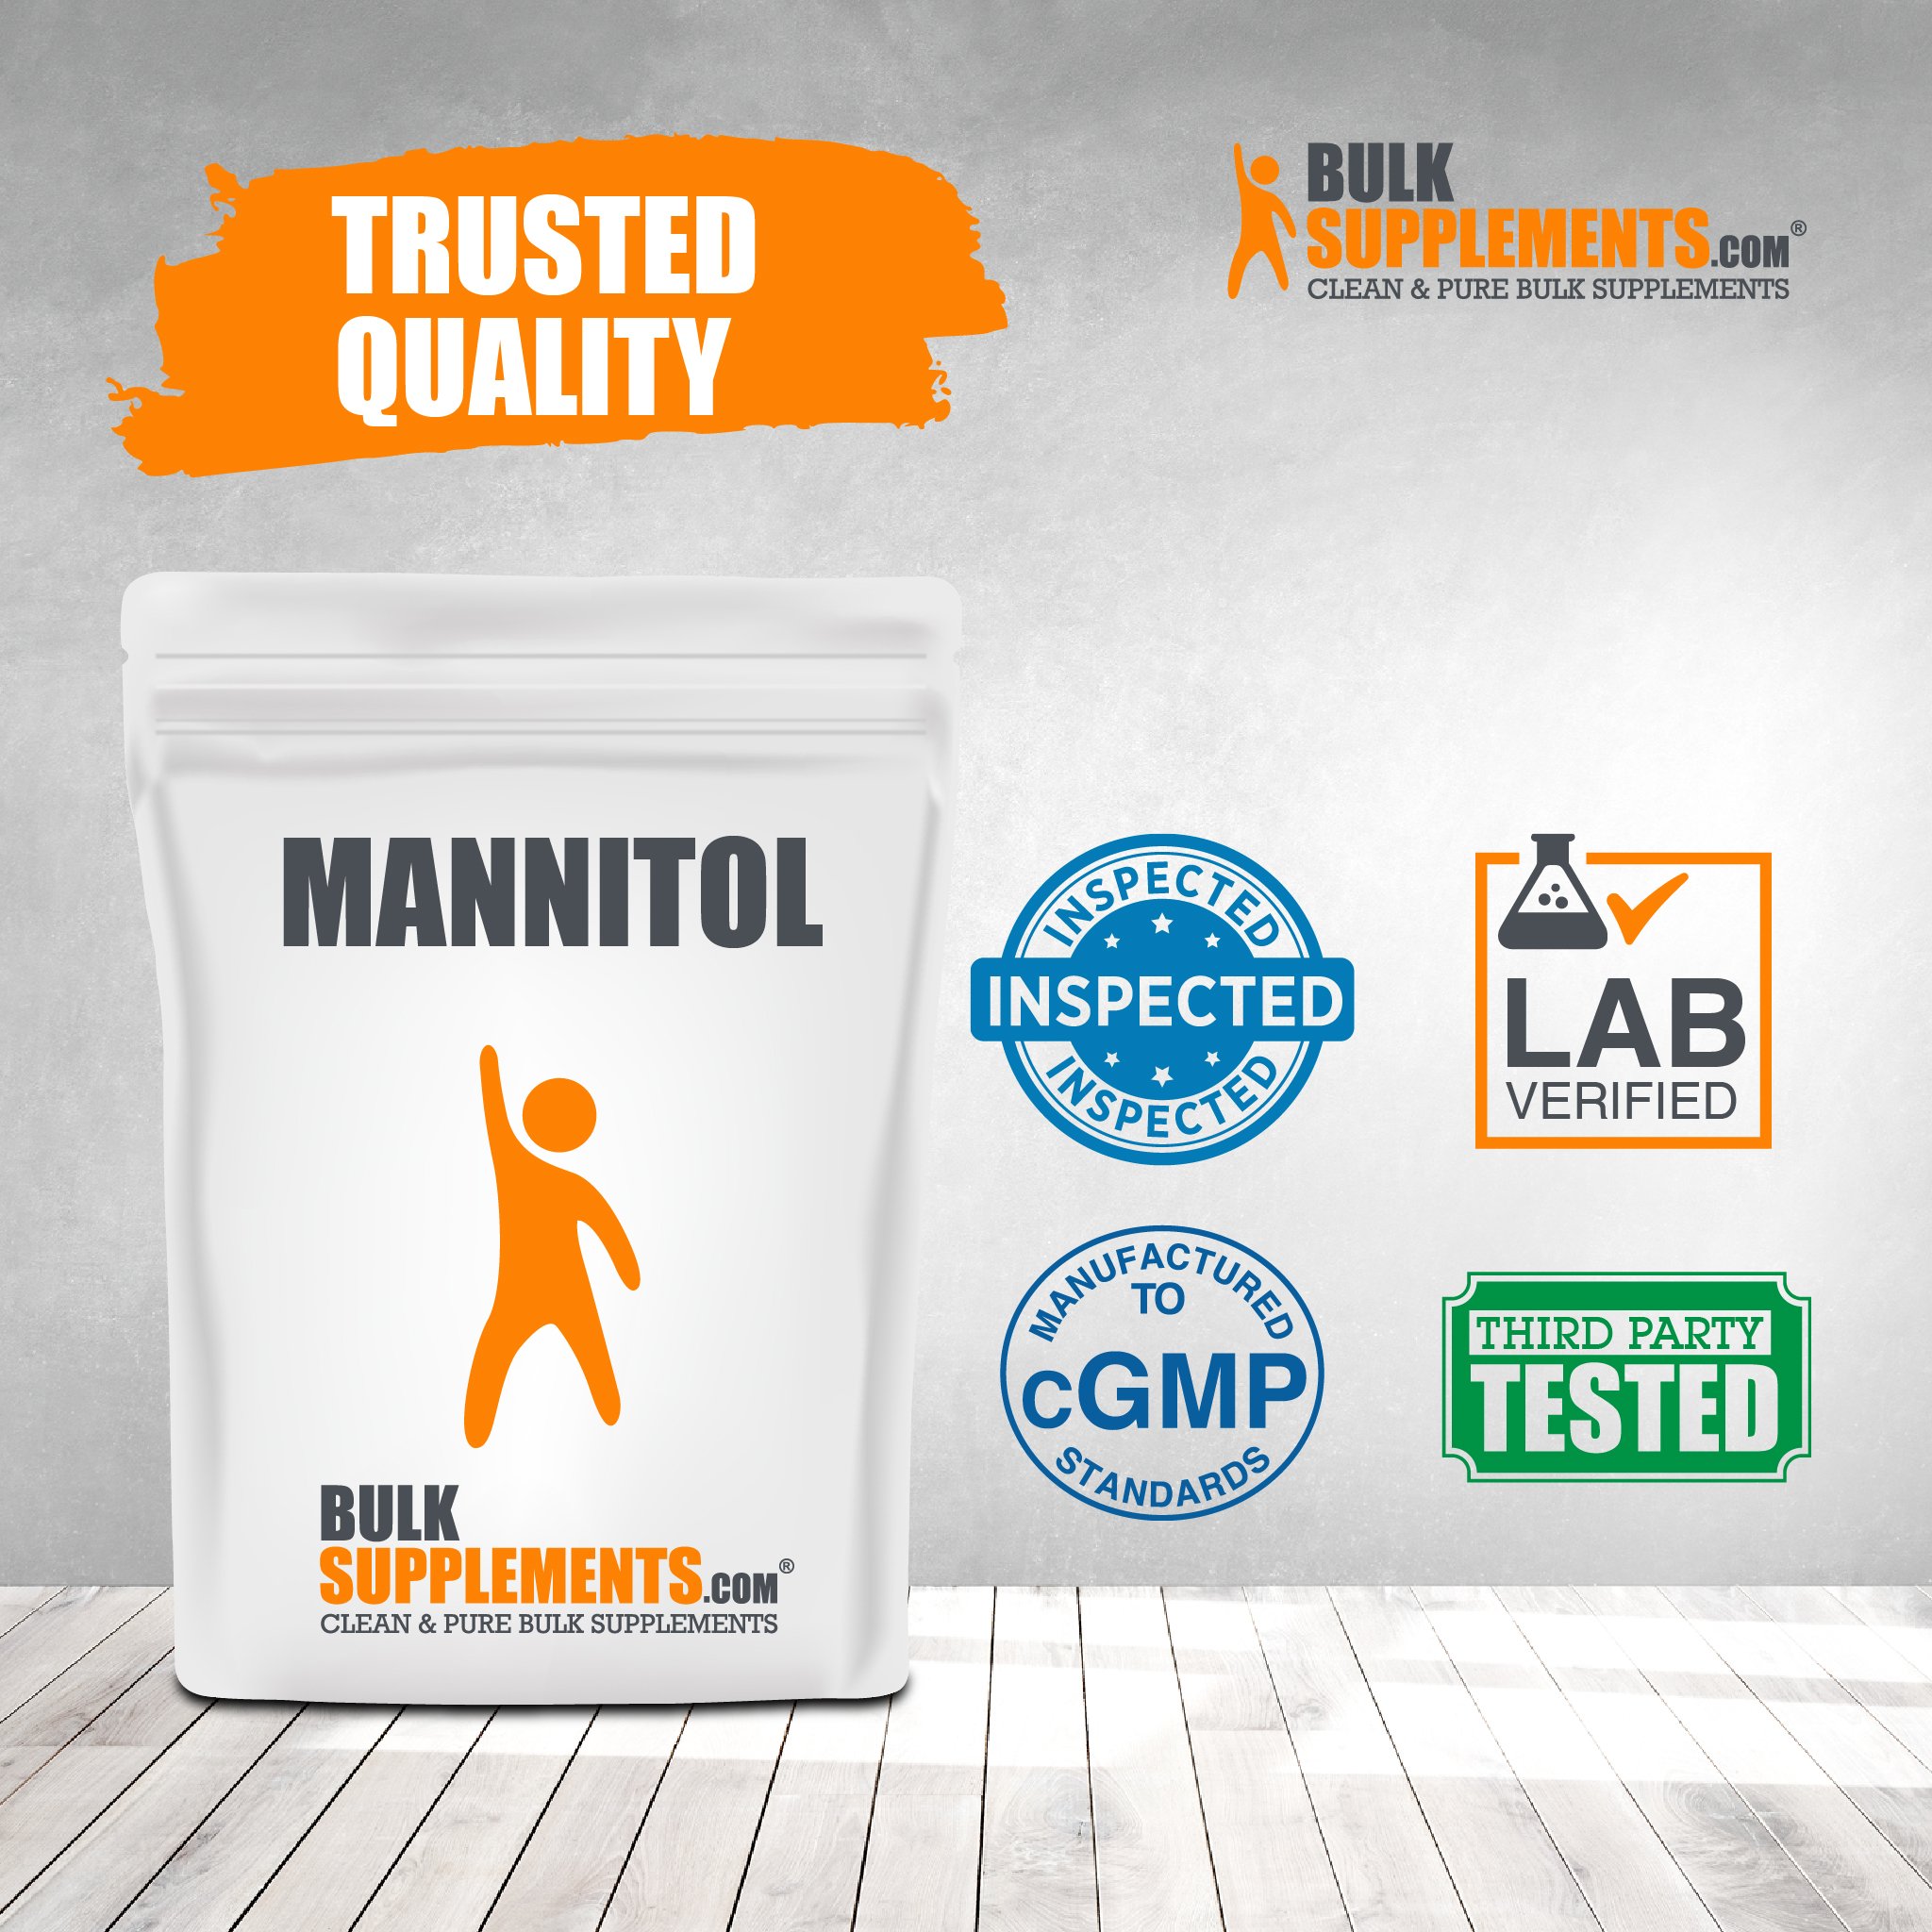 BulkSupplements.com Mannitol Powder - Mannitol Sweetener - Mannitol Powder Ultra Pure - Mannitol Sugar (500 Grams - 1.1 lbs) - image 4 of 5